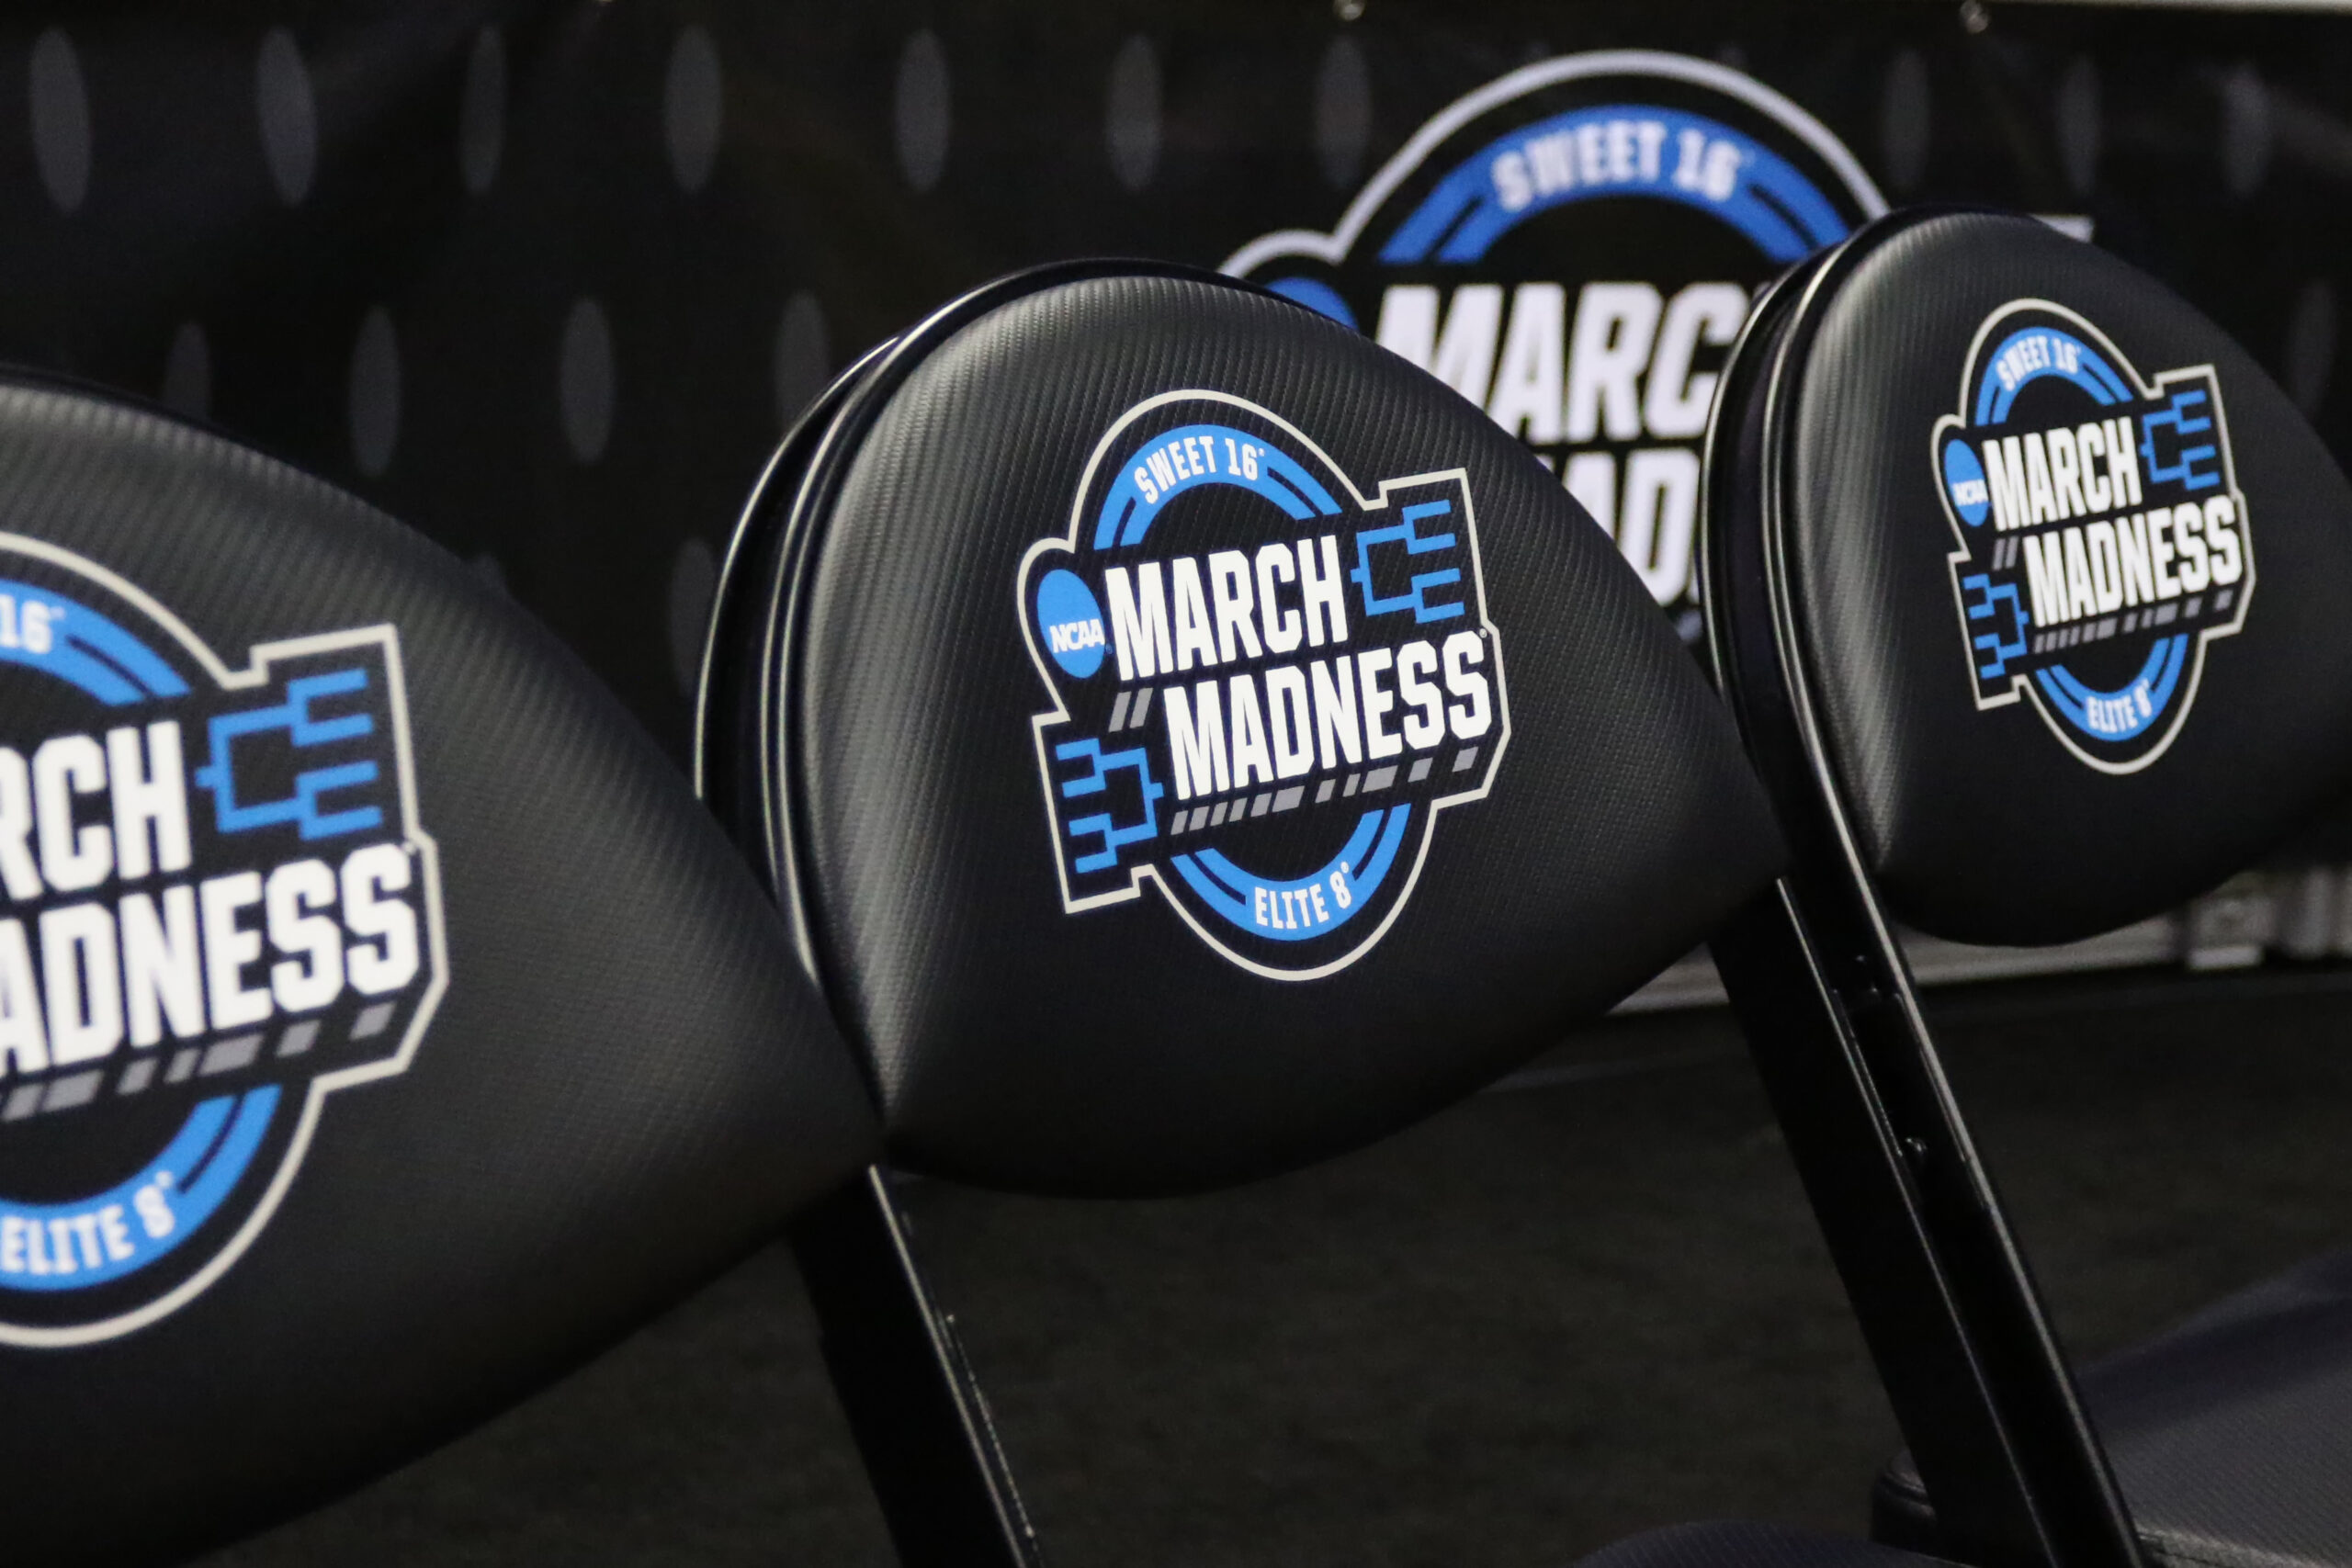 KANSAS CITY, MO - MARCH 29: A view of the March Madness logo on chairs before an NCAA Midwest Regional Sweet Sixteen game between the Auburn Tigers and North Carolina Tar Heels on March 29, 2019 at Sprint Center in Kansas City, MO.  (Photo by Scott Winters/Icon Sportswire via Getty Images)